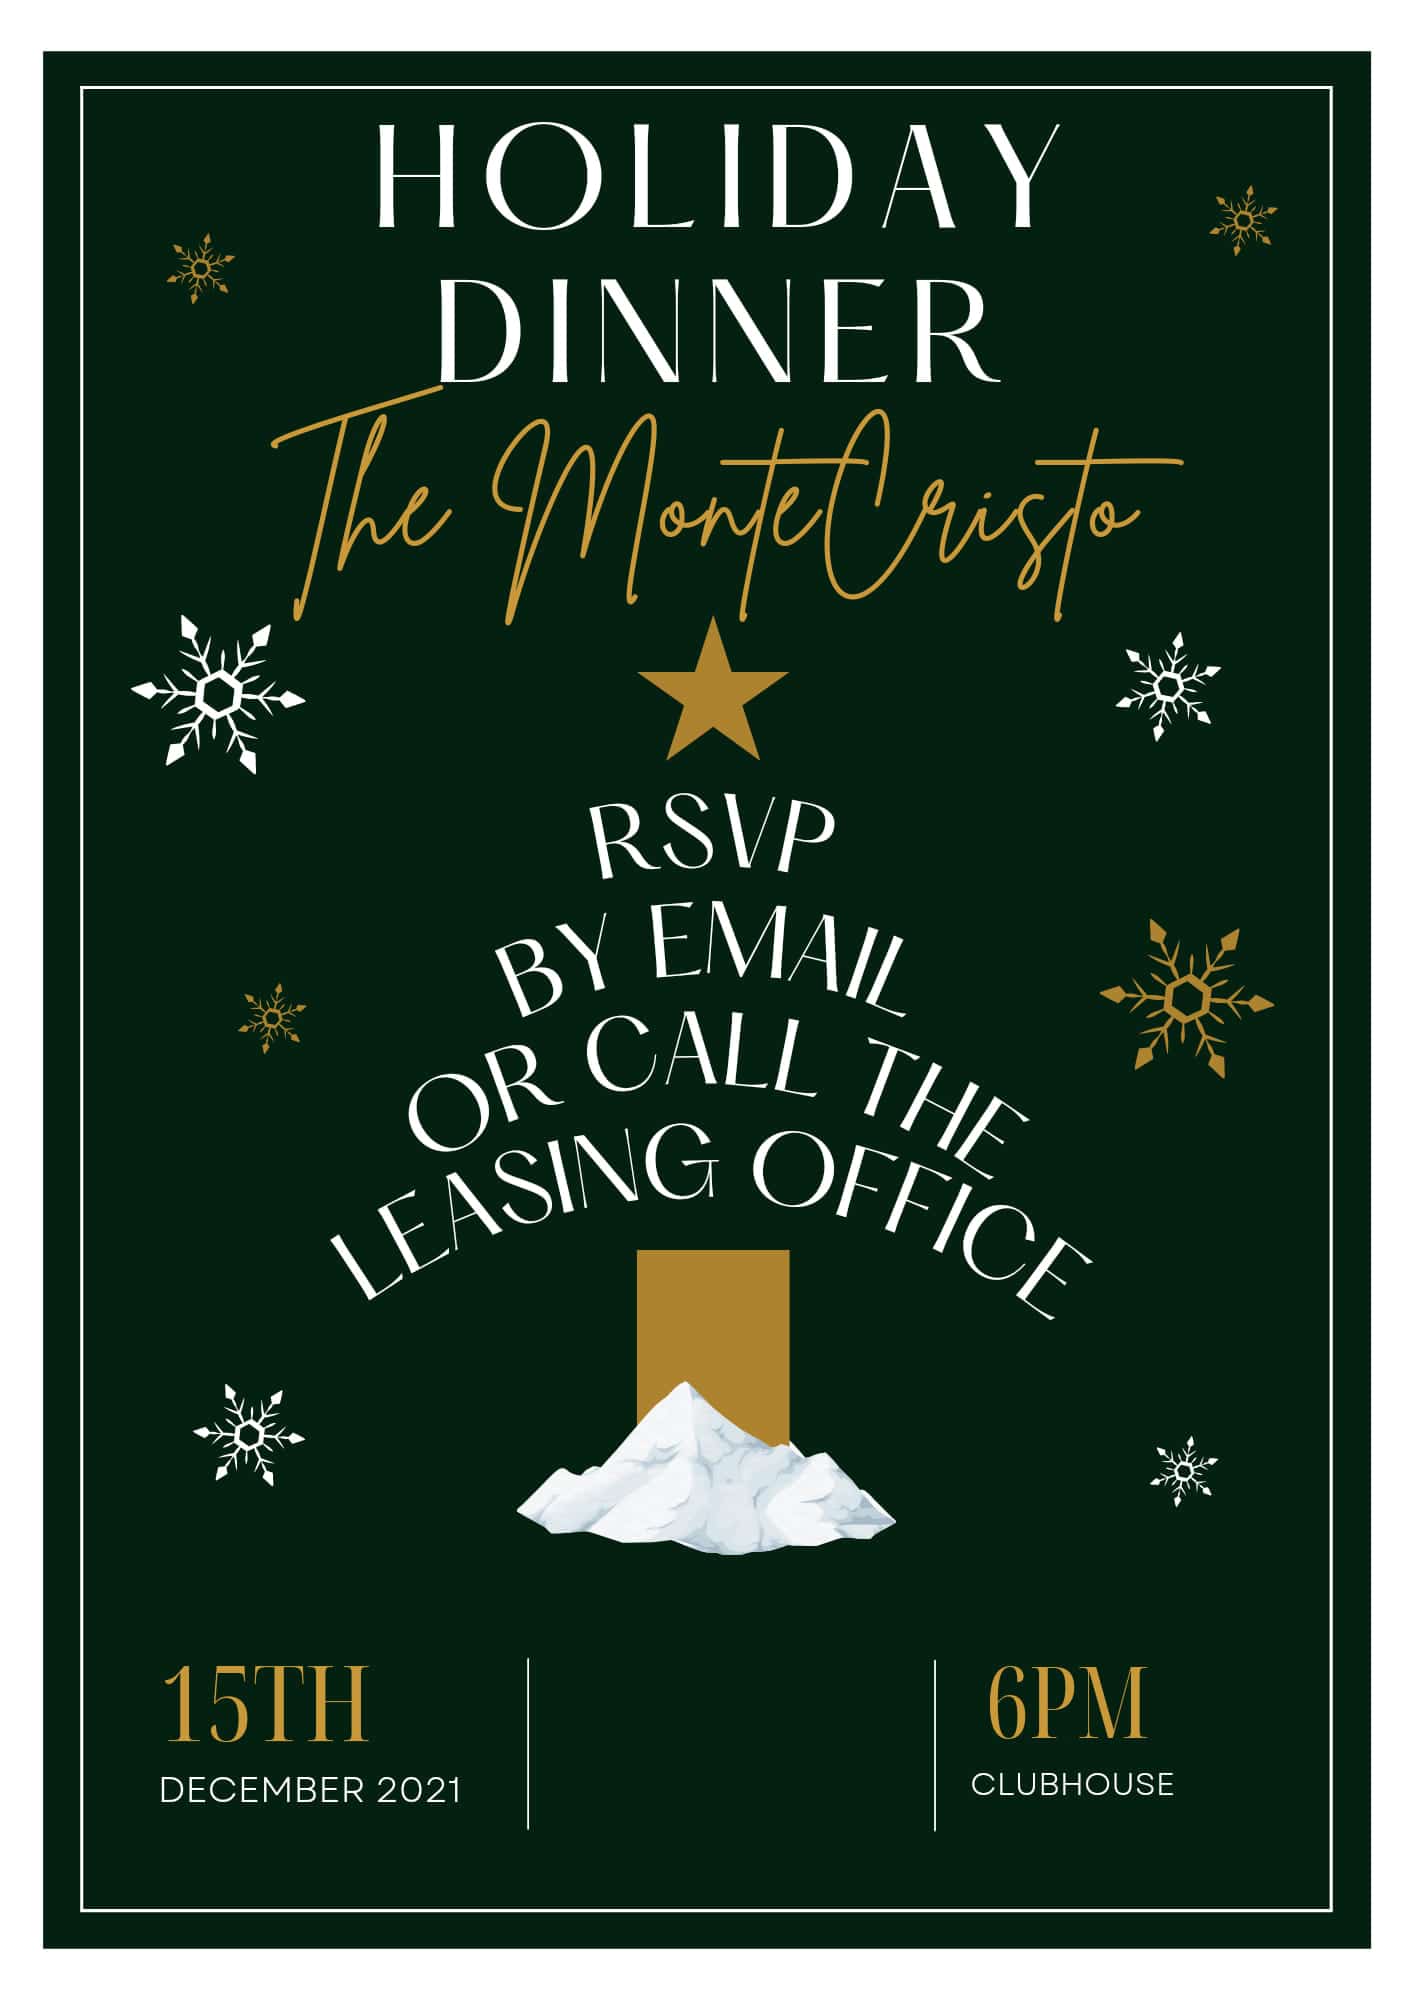 A festive holiday dinner invitation adorned with a Christmas tree and snowflakes.